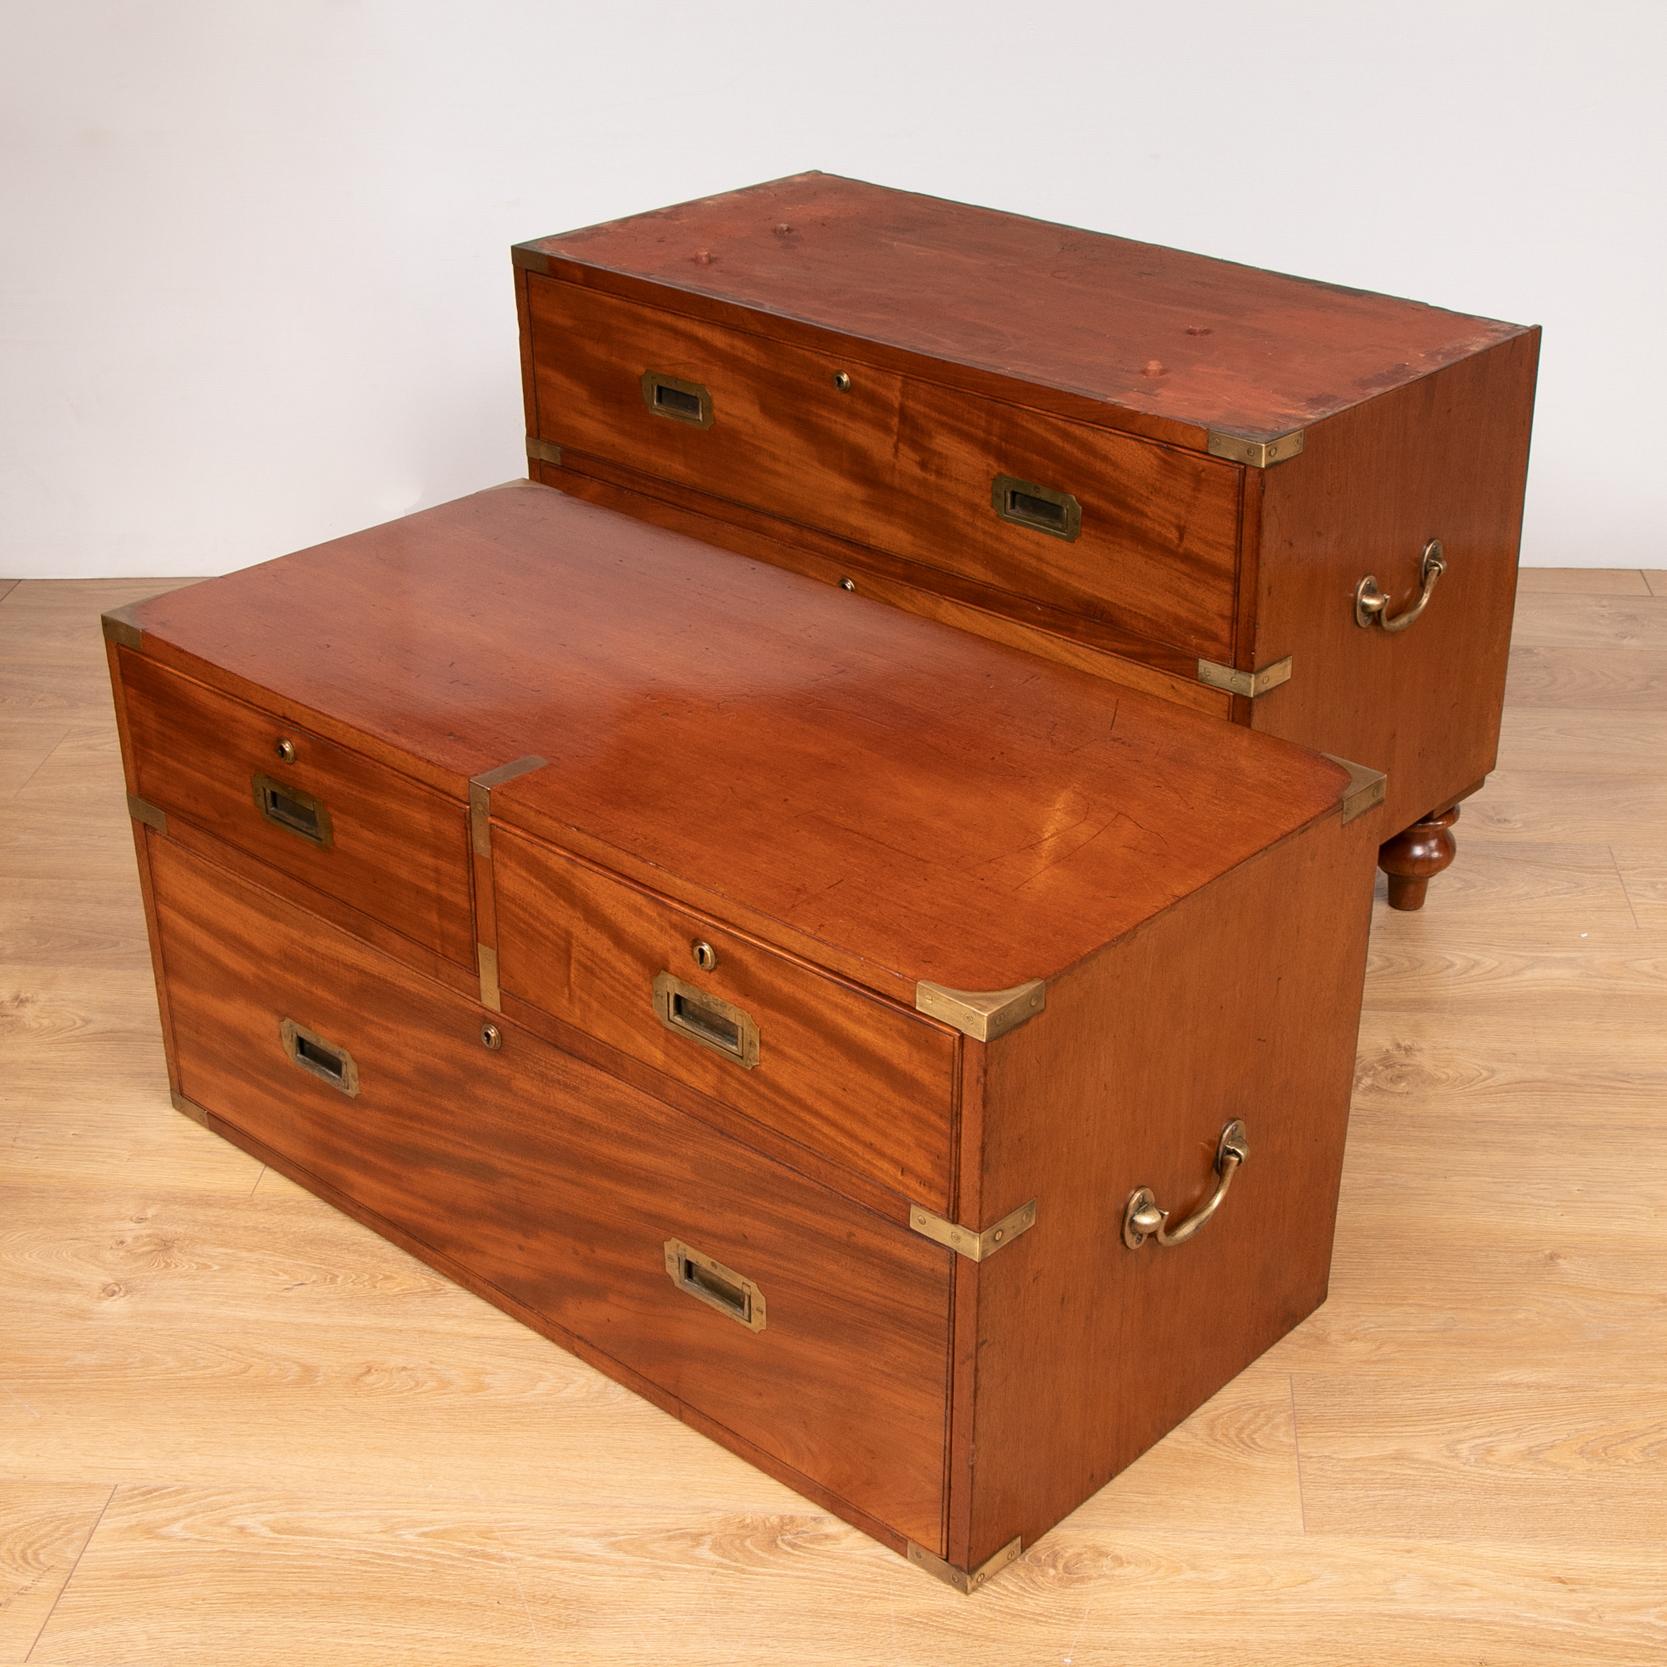 British Colonial Superb 19th Century Military Mahogany Campaign Chest on Chest